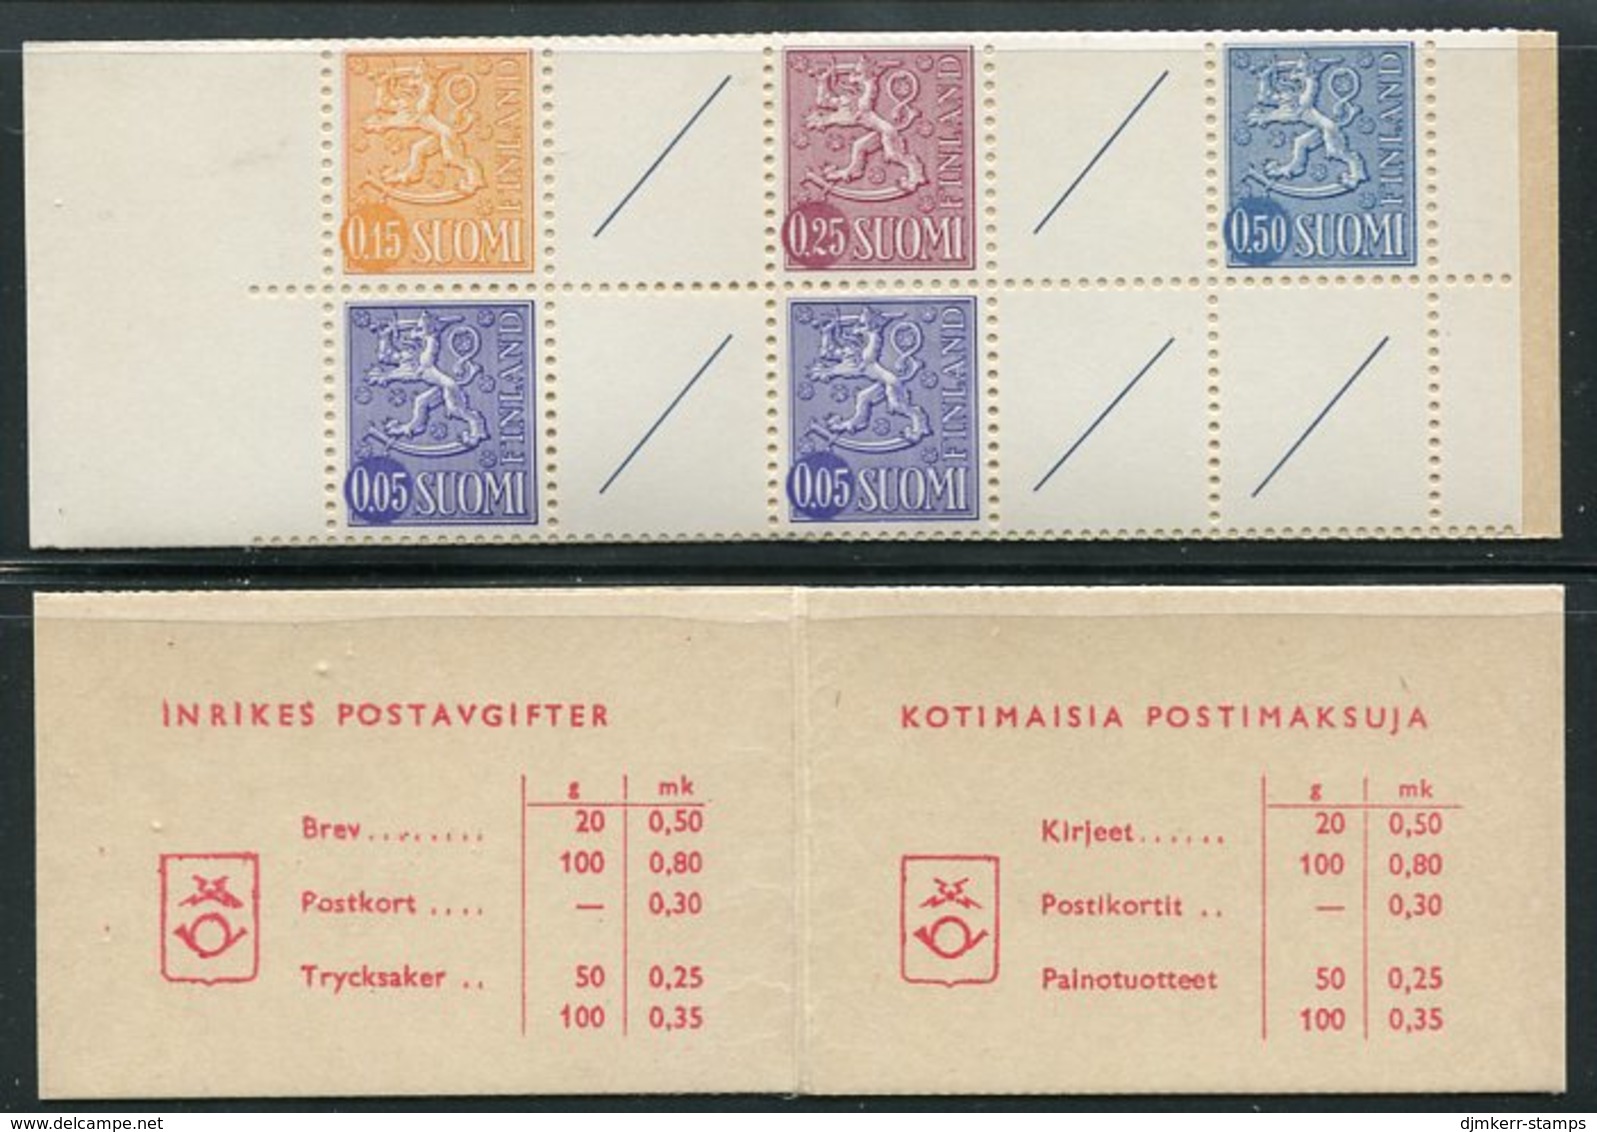 FINLAND 1972 Lion Definitive 1 Mk. Complete Booklet MNH / **.  Michel MH 5 - Cuadernillos